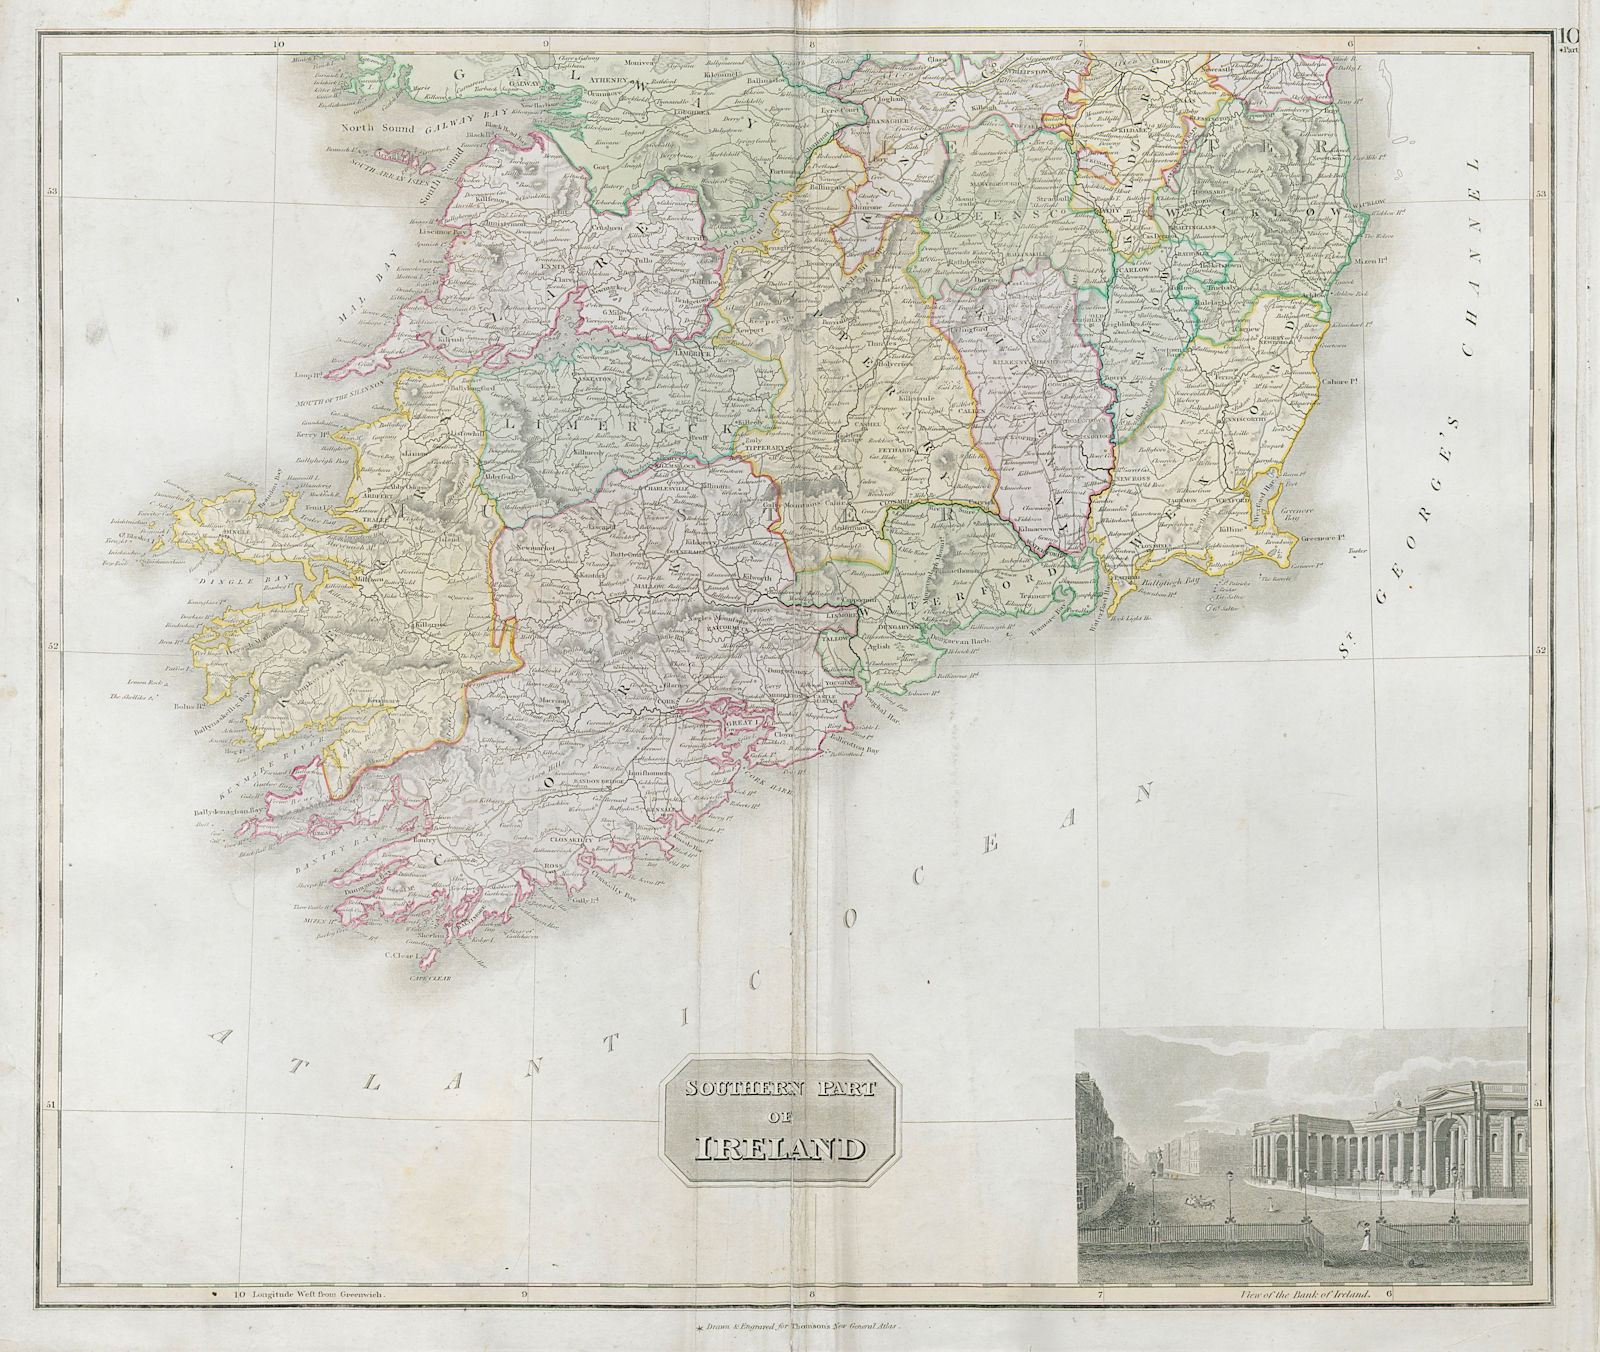 Associate Product Southern part of Ireland. Munster Leinster. Coach roads. THOMSON 1830 old map